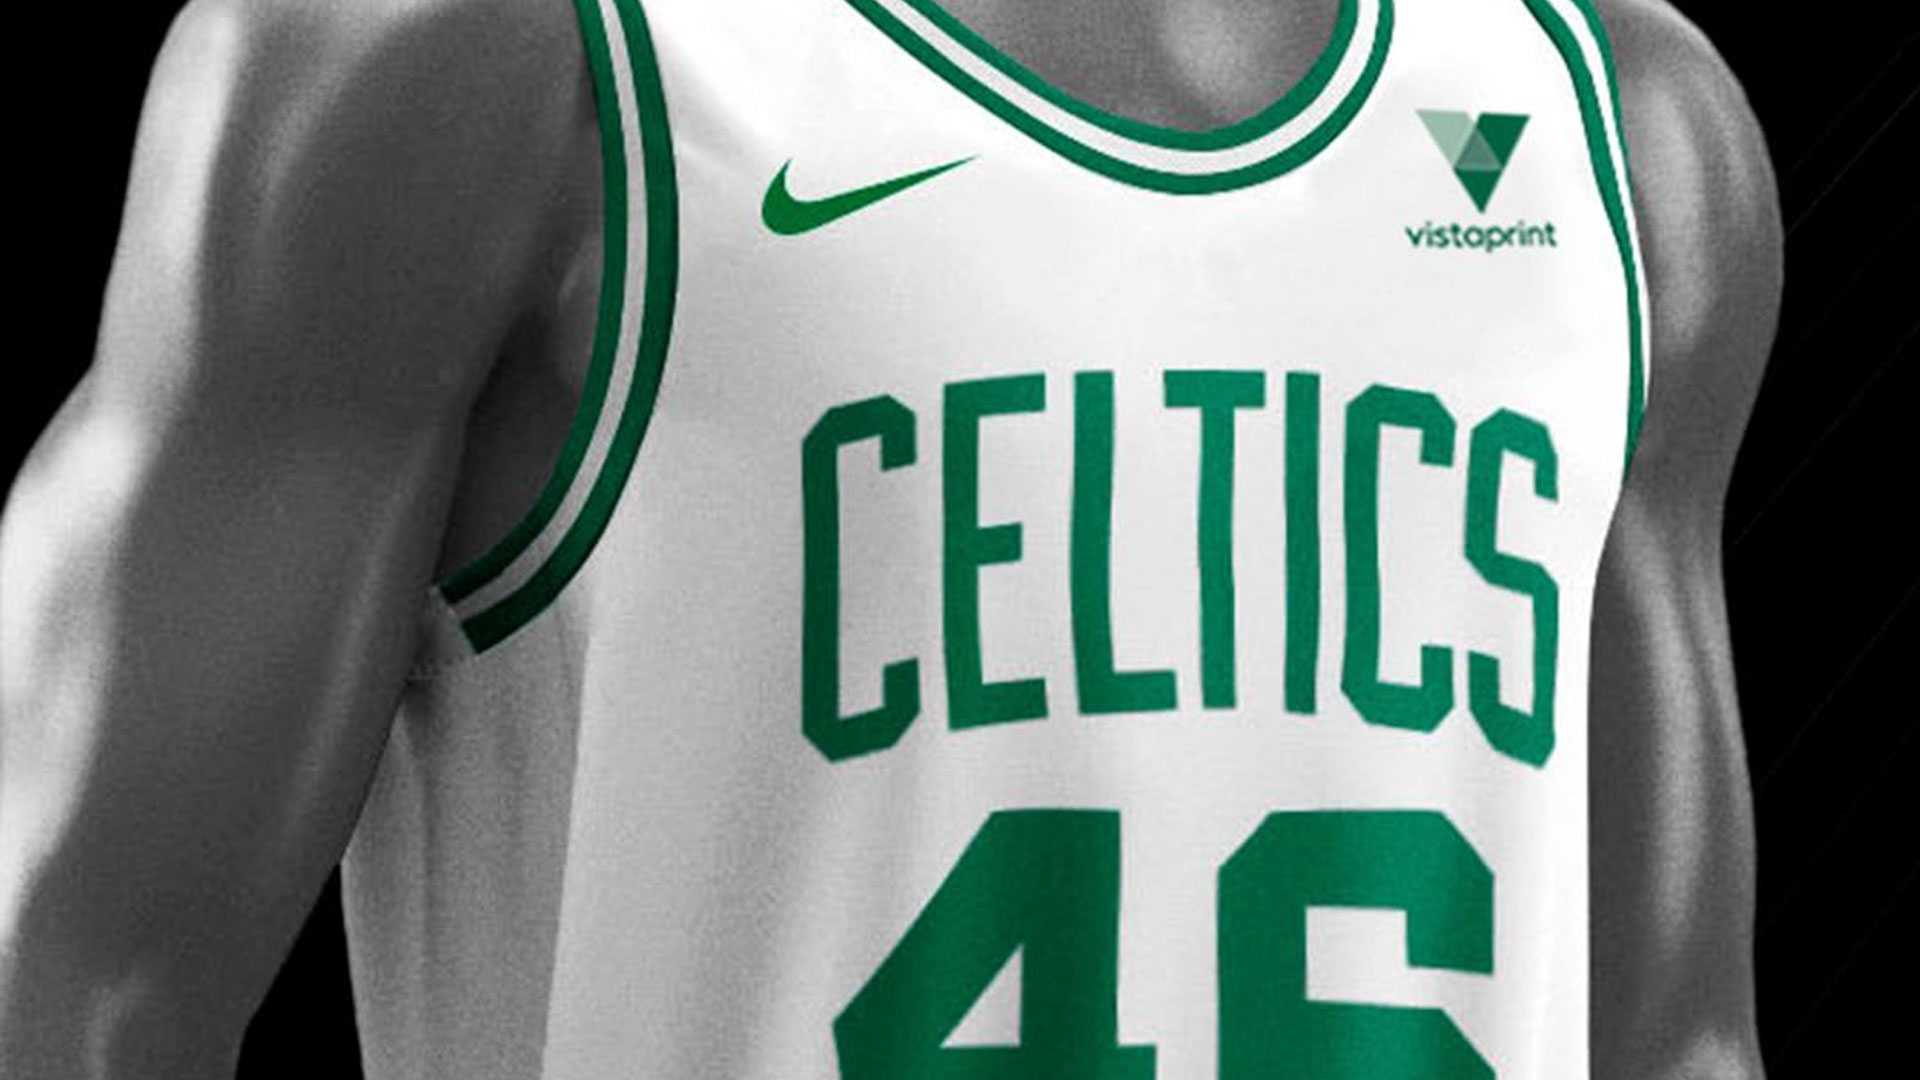 celtics yellow and green jersey